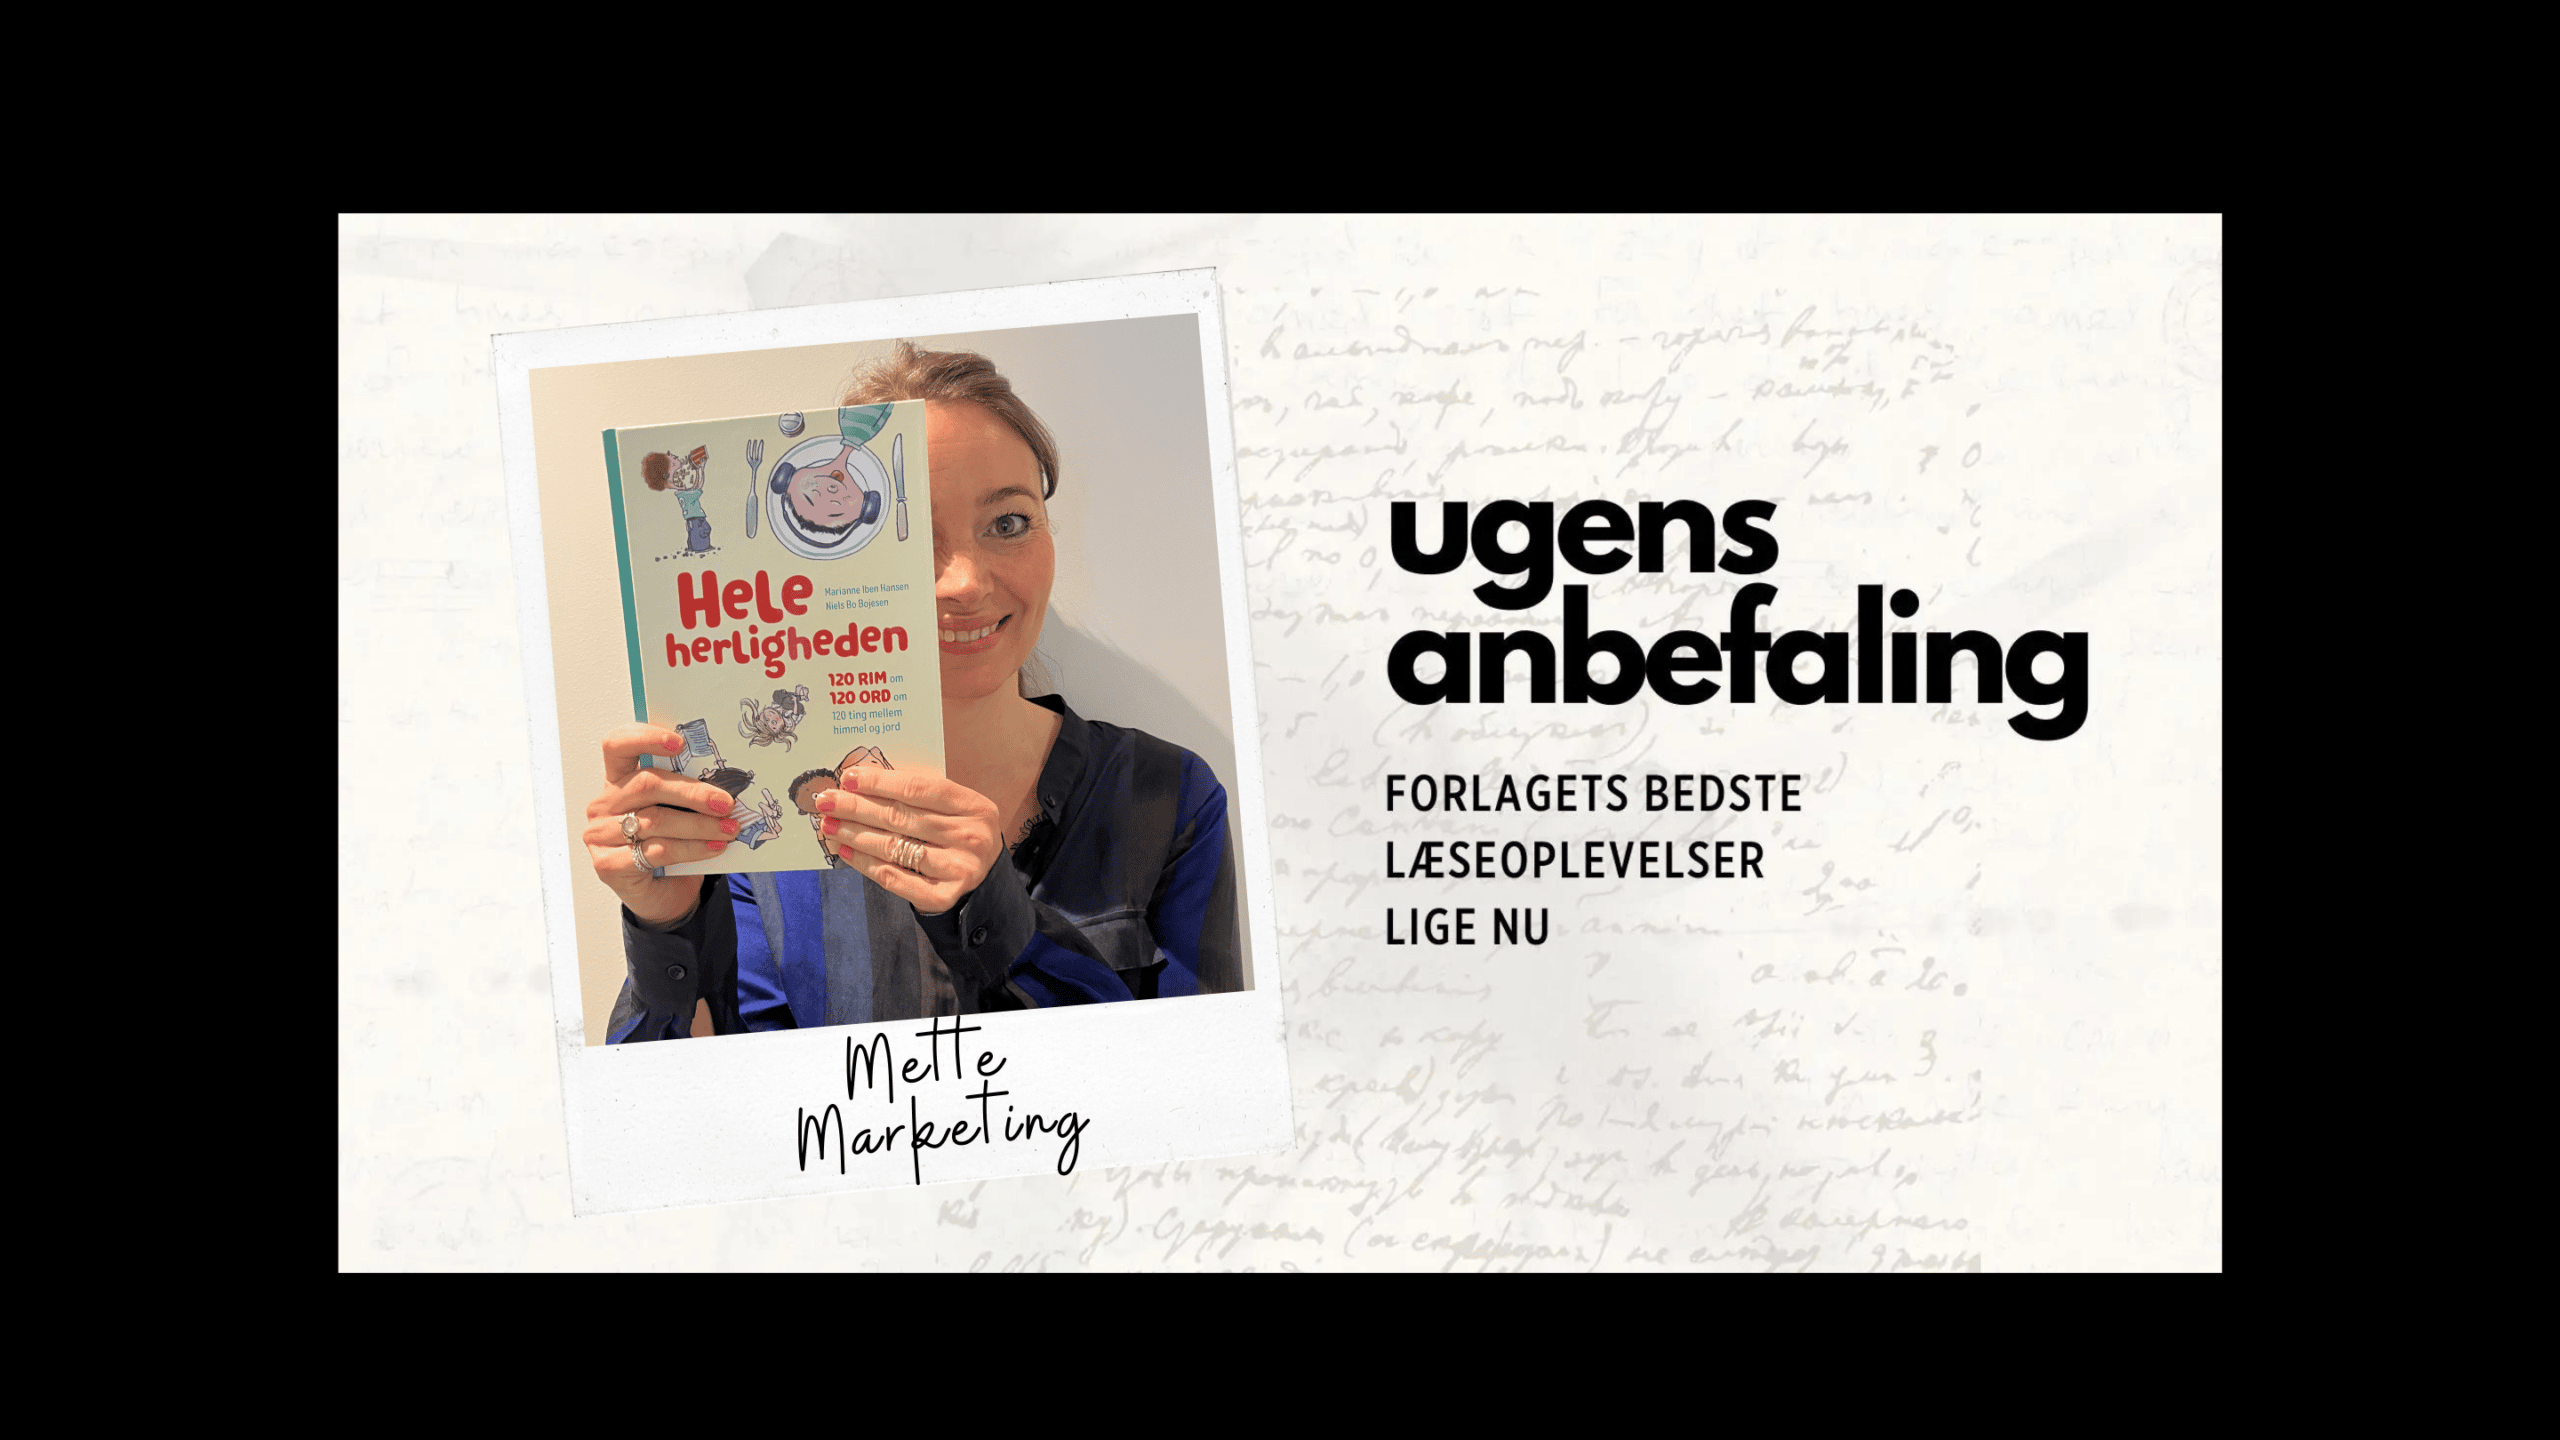 Ugens anbefaling